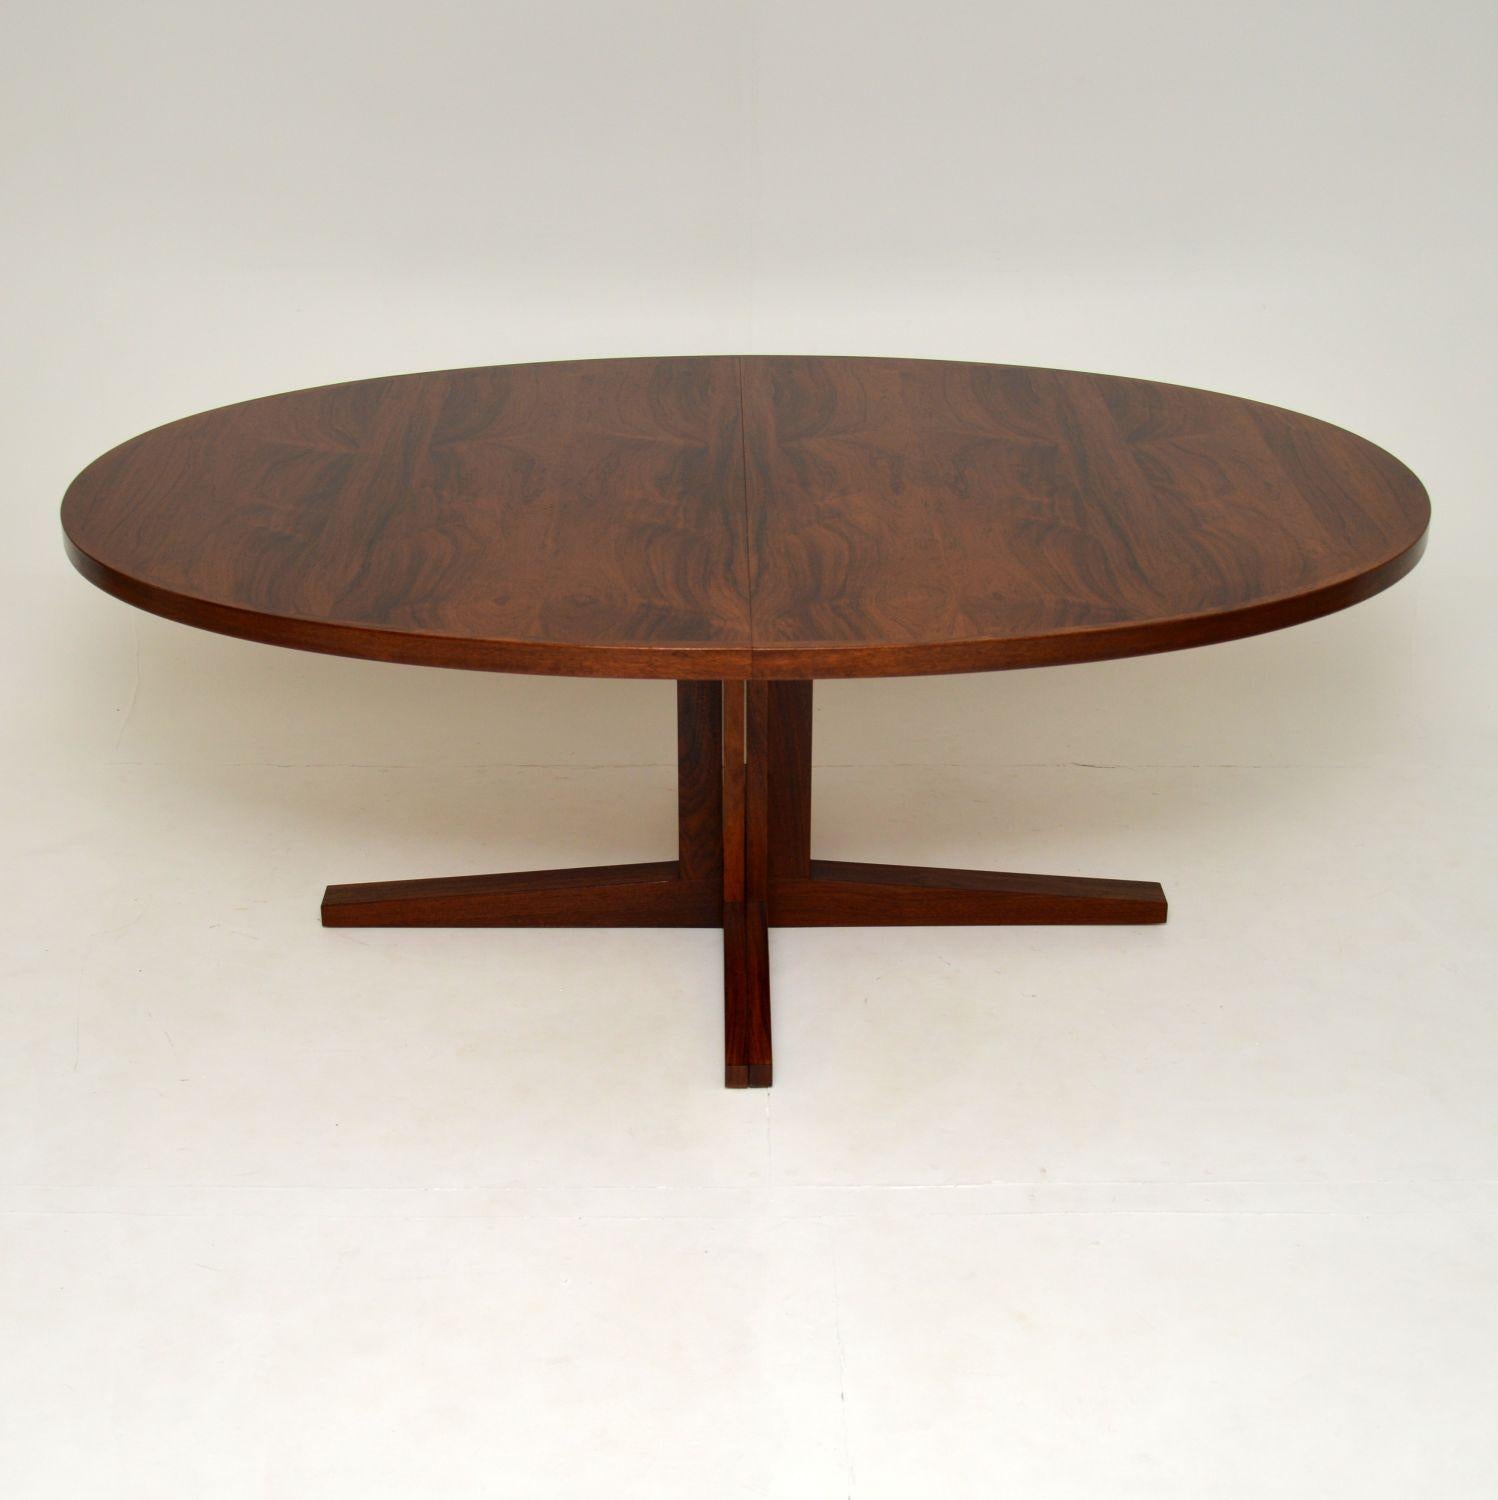 A superb and very large vintage Danish oval dining table, beautifully made from wood. This was designed by John Mortensen, it was made by Heltborg Mobler in Denmark around the 1960’s.

The quality is absolutely outstanding, and this is a great